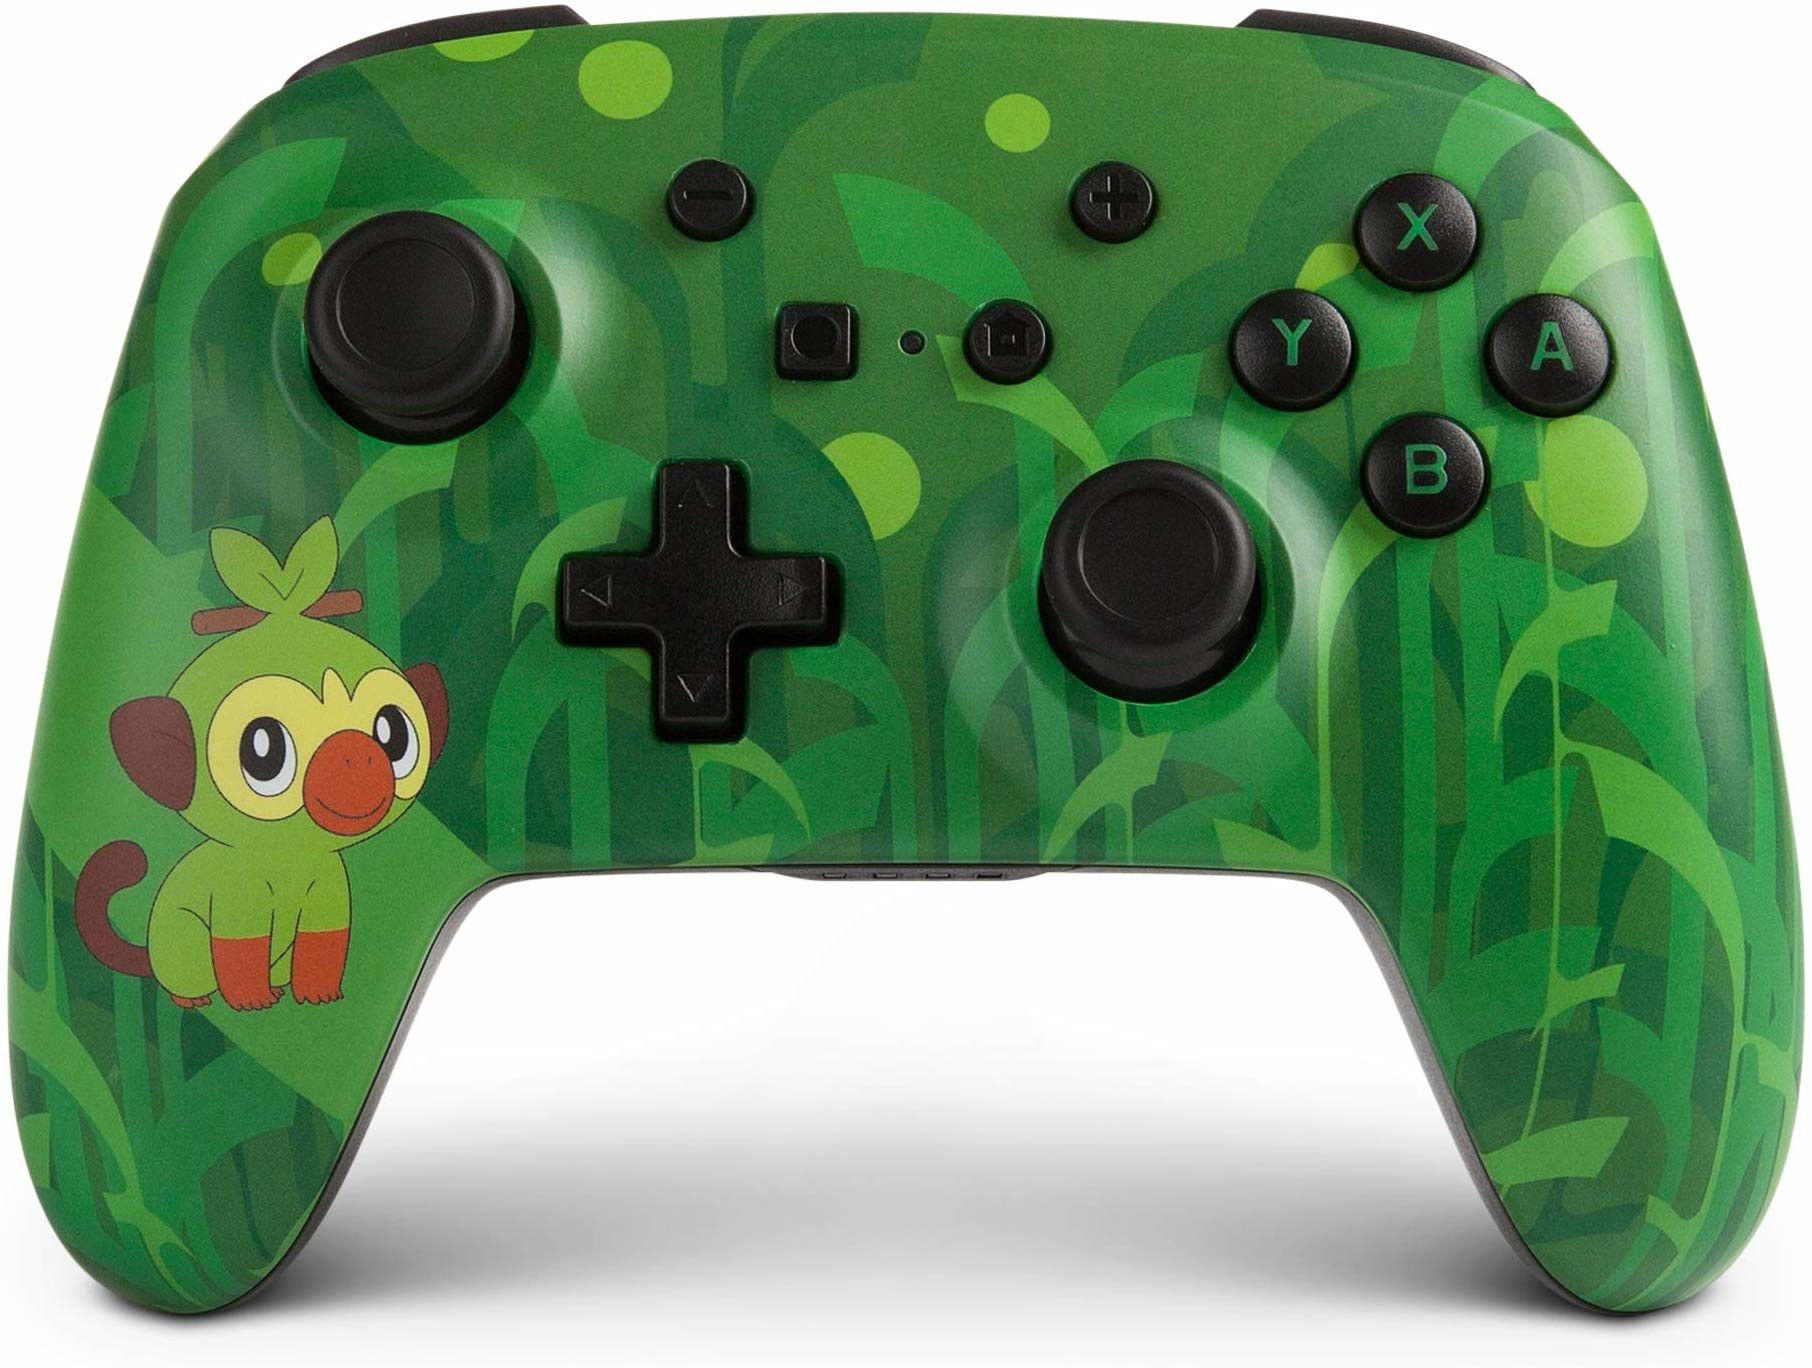 New Nintendo Switch Controllers Based on Pokemon Sword and Shield Starters Revealed